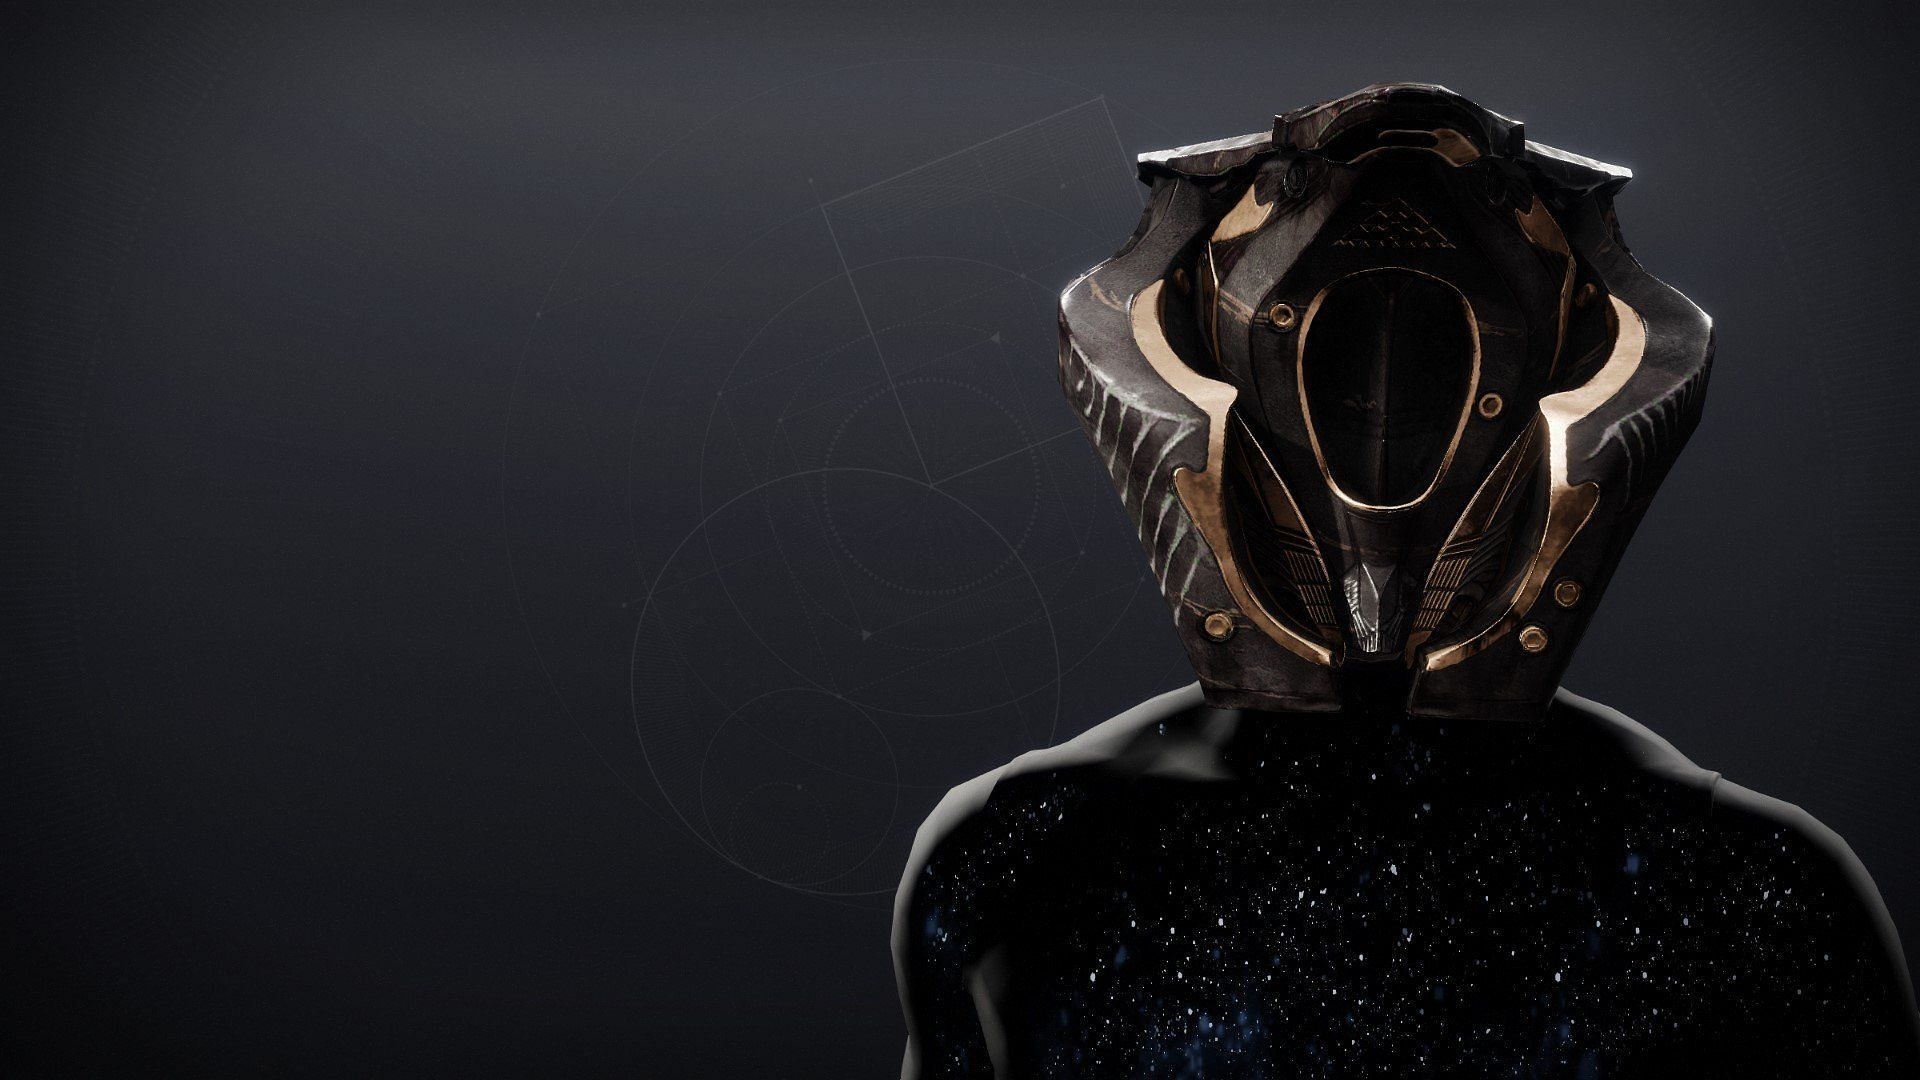 The Cenotaph Mask Helmet can be extremely useful when used correctly in Destiny 2 (Image via Light.GG)